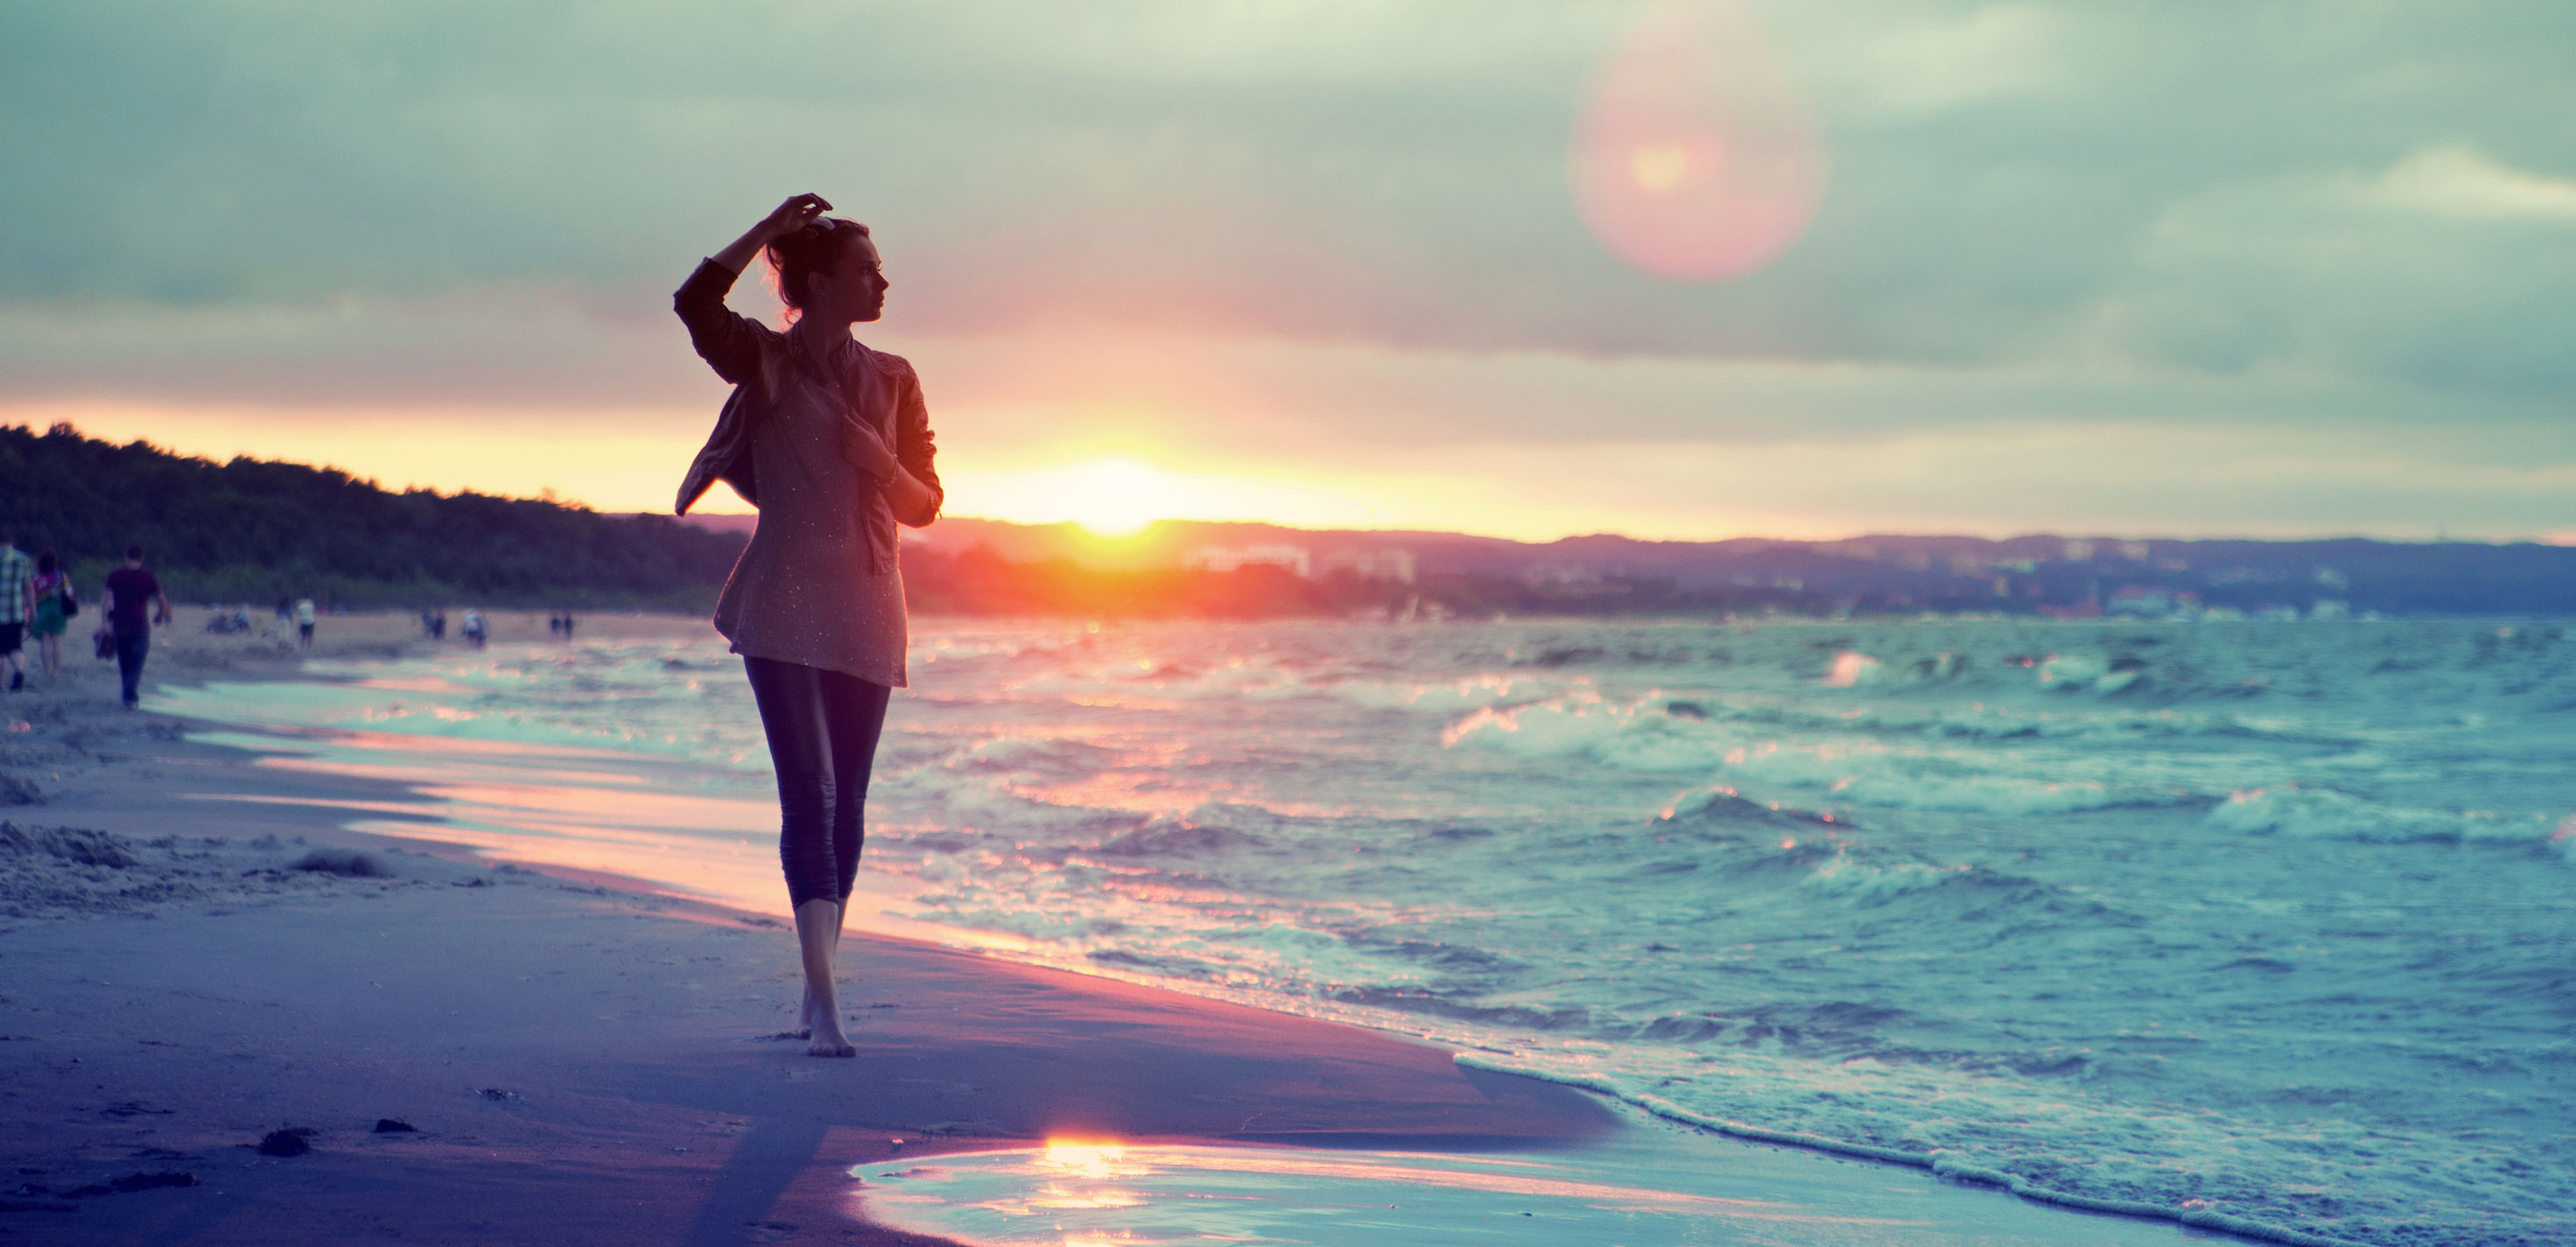 2943x1425 mood-girl-sand-sea-water-wave-signs-people-sun-sunset-background-wallpaper -widescreen-fullscreen-widescreen-hd-wallpapers-background